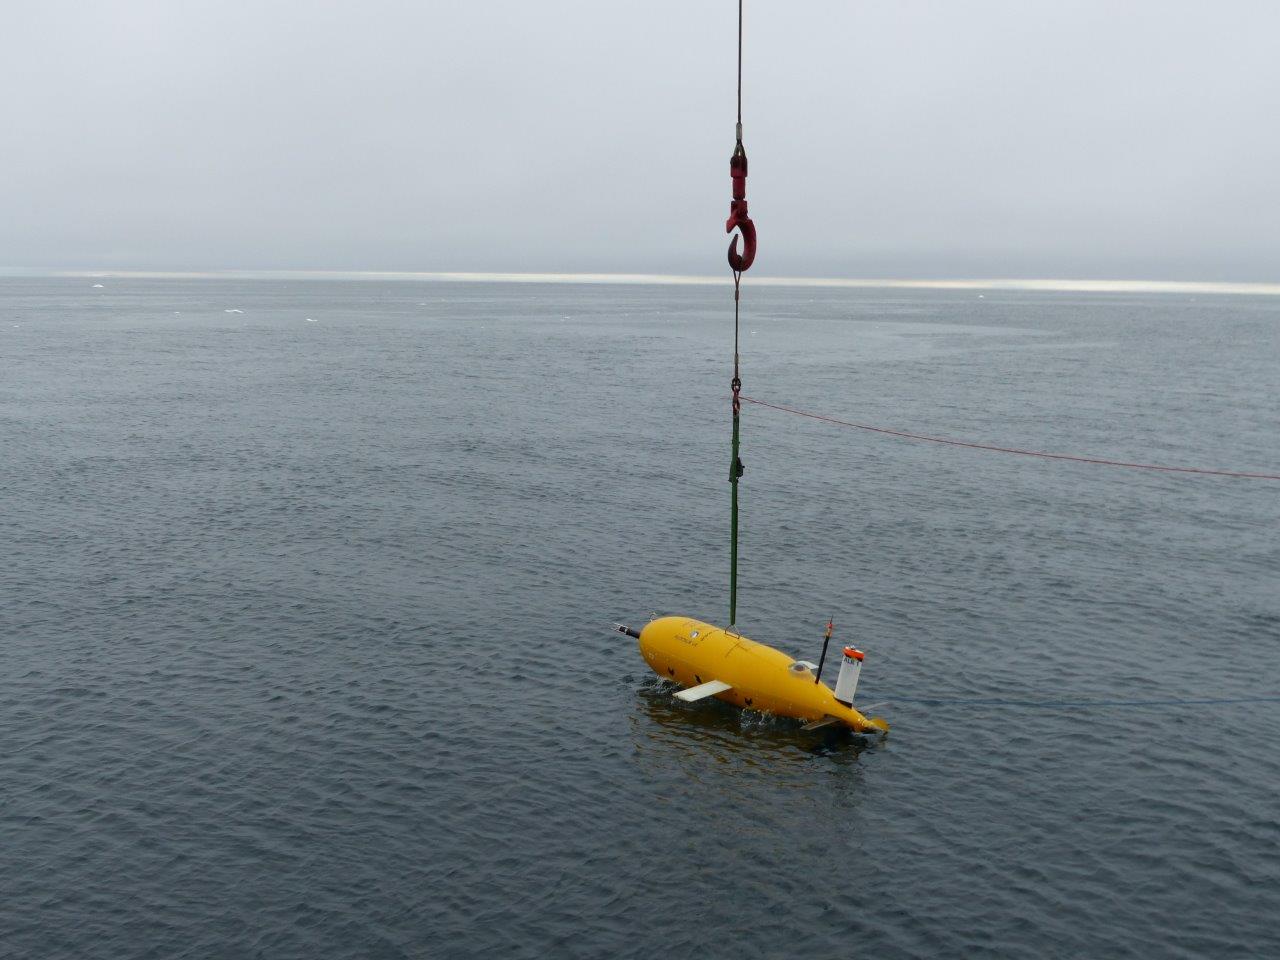 The submersible craft Boaty McBoatface will be one of two key robotic devices used to examine the iceshelf holding back the glacier